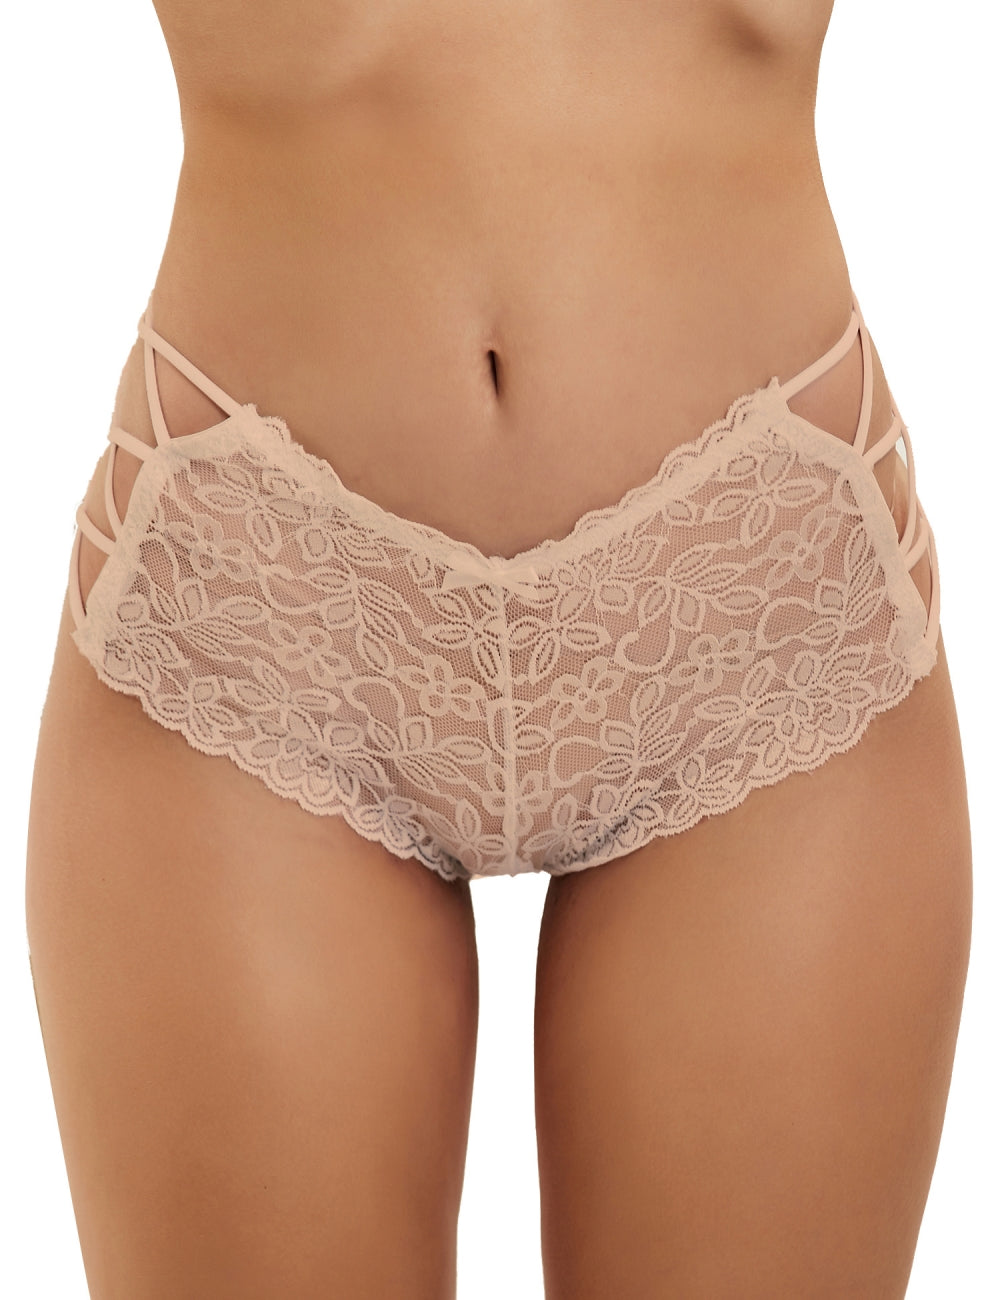 High Quality Transparent Floral Lace Sexy Underwear Panties